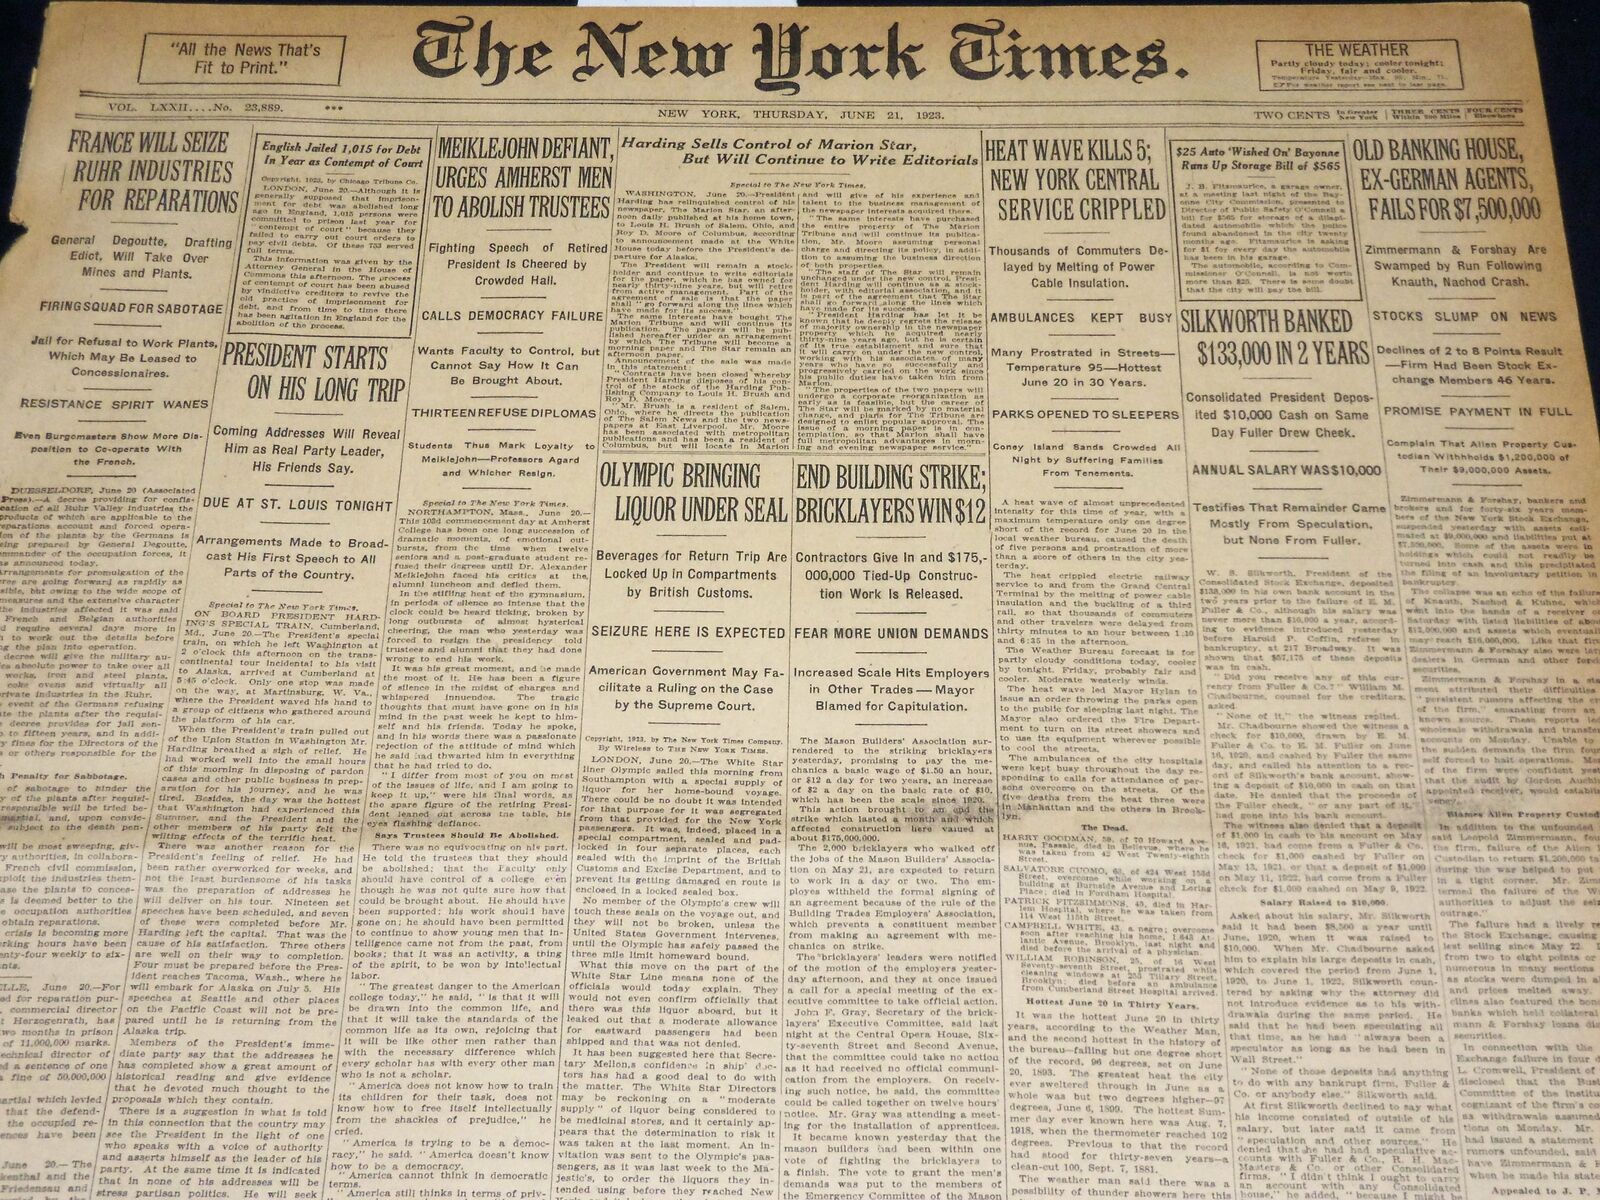 1923 JUNE 21 NEW YORK TIMES - HARDING SELLS CONTROL OF MARION STAR - NT 8729